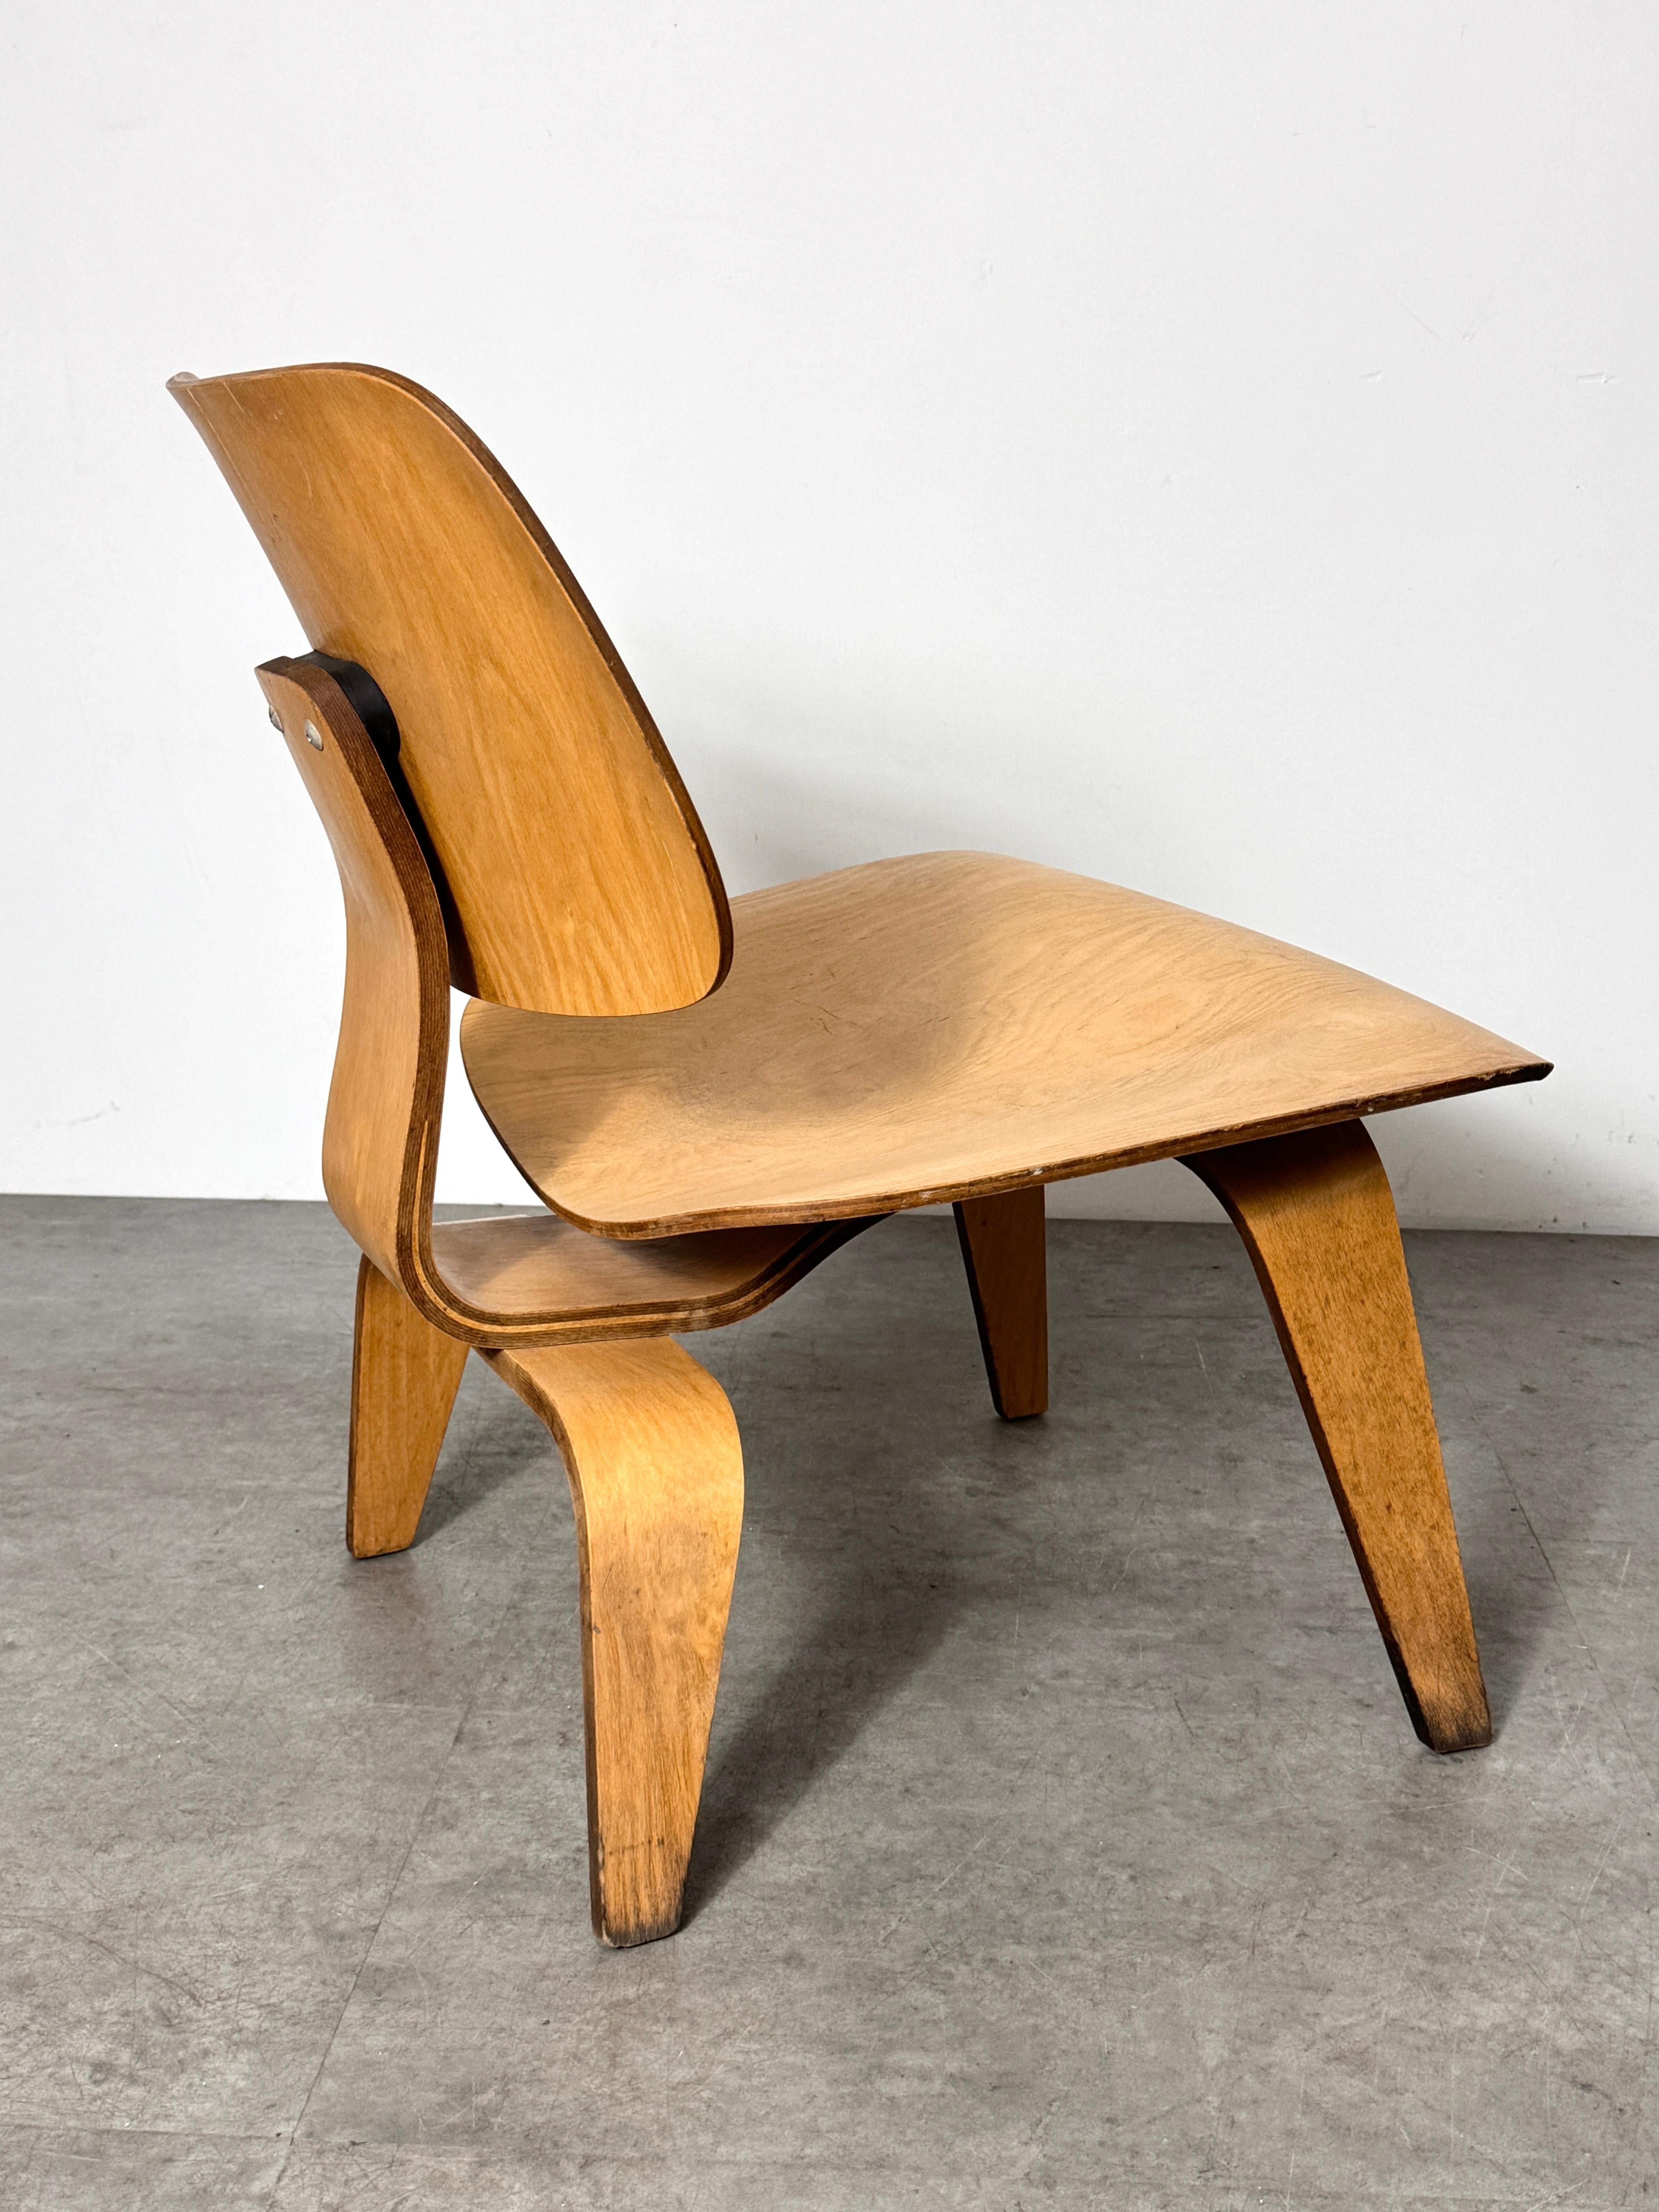 Mid-20th Century Early Vintage Charles Eames for Herman Miller LCW Birch Plywood Lounge Chair